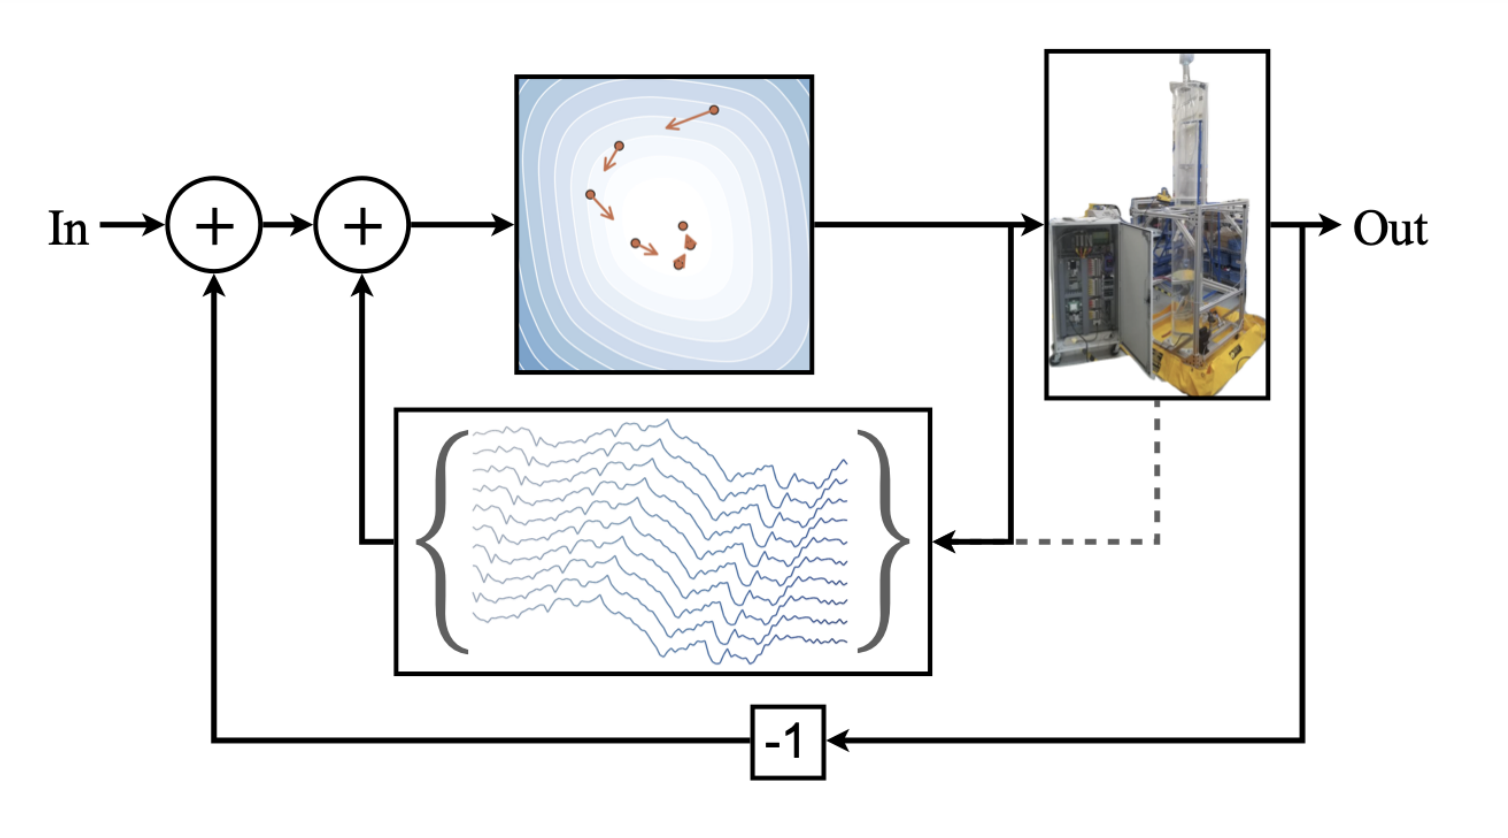 A modular framework for stabilizing deep reinforcement learning control by Nathan P. Lawrence, Philip D. Loewen, Shuyuan Wang, Michael G. Forbes, R. Bhushan Gopaluni